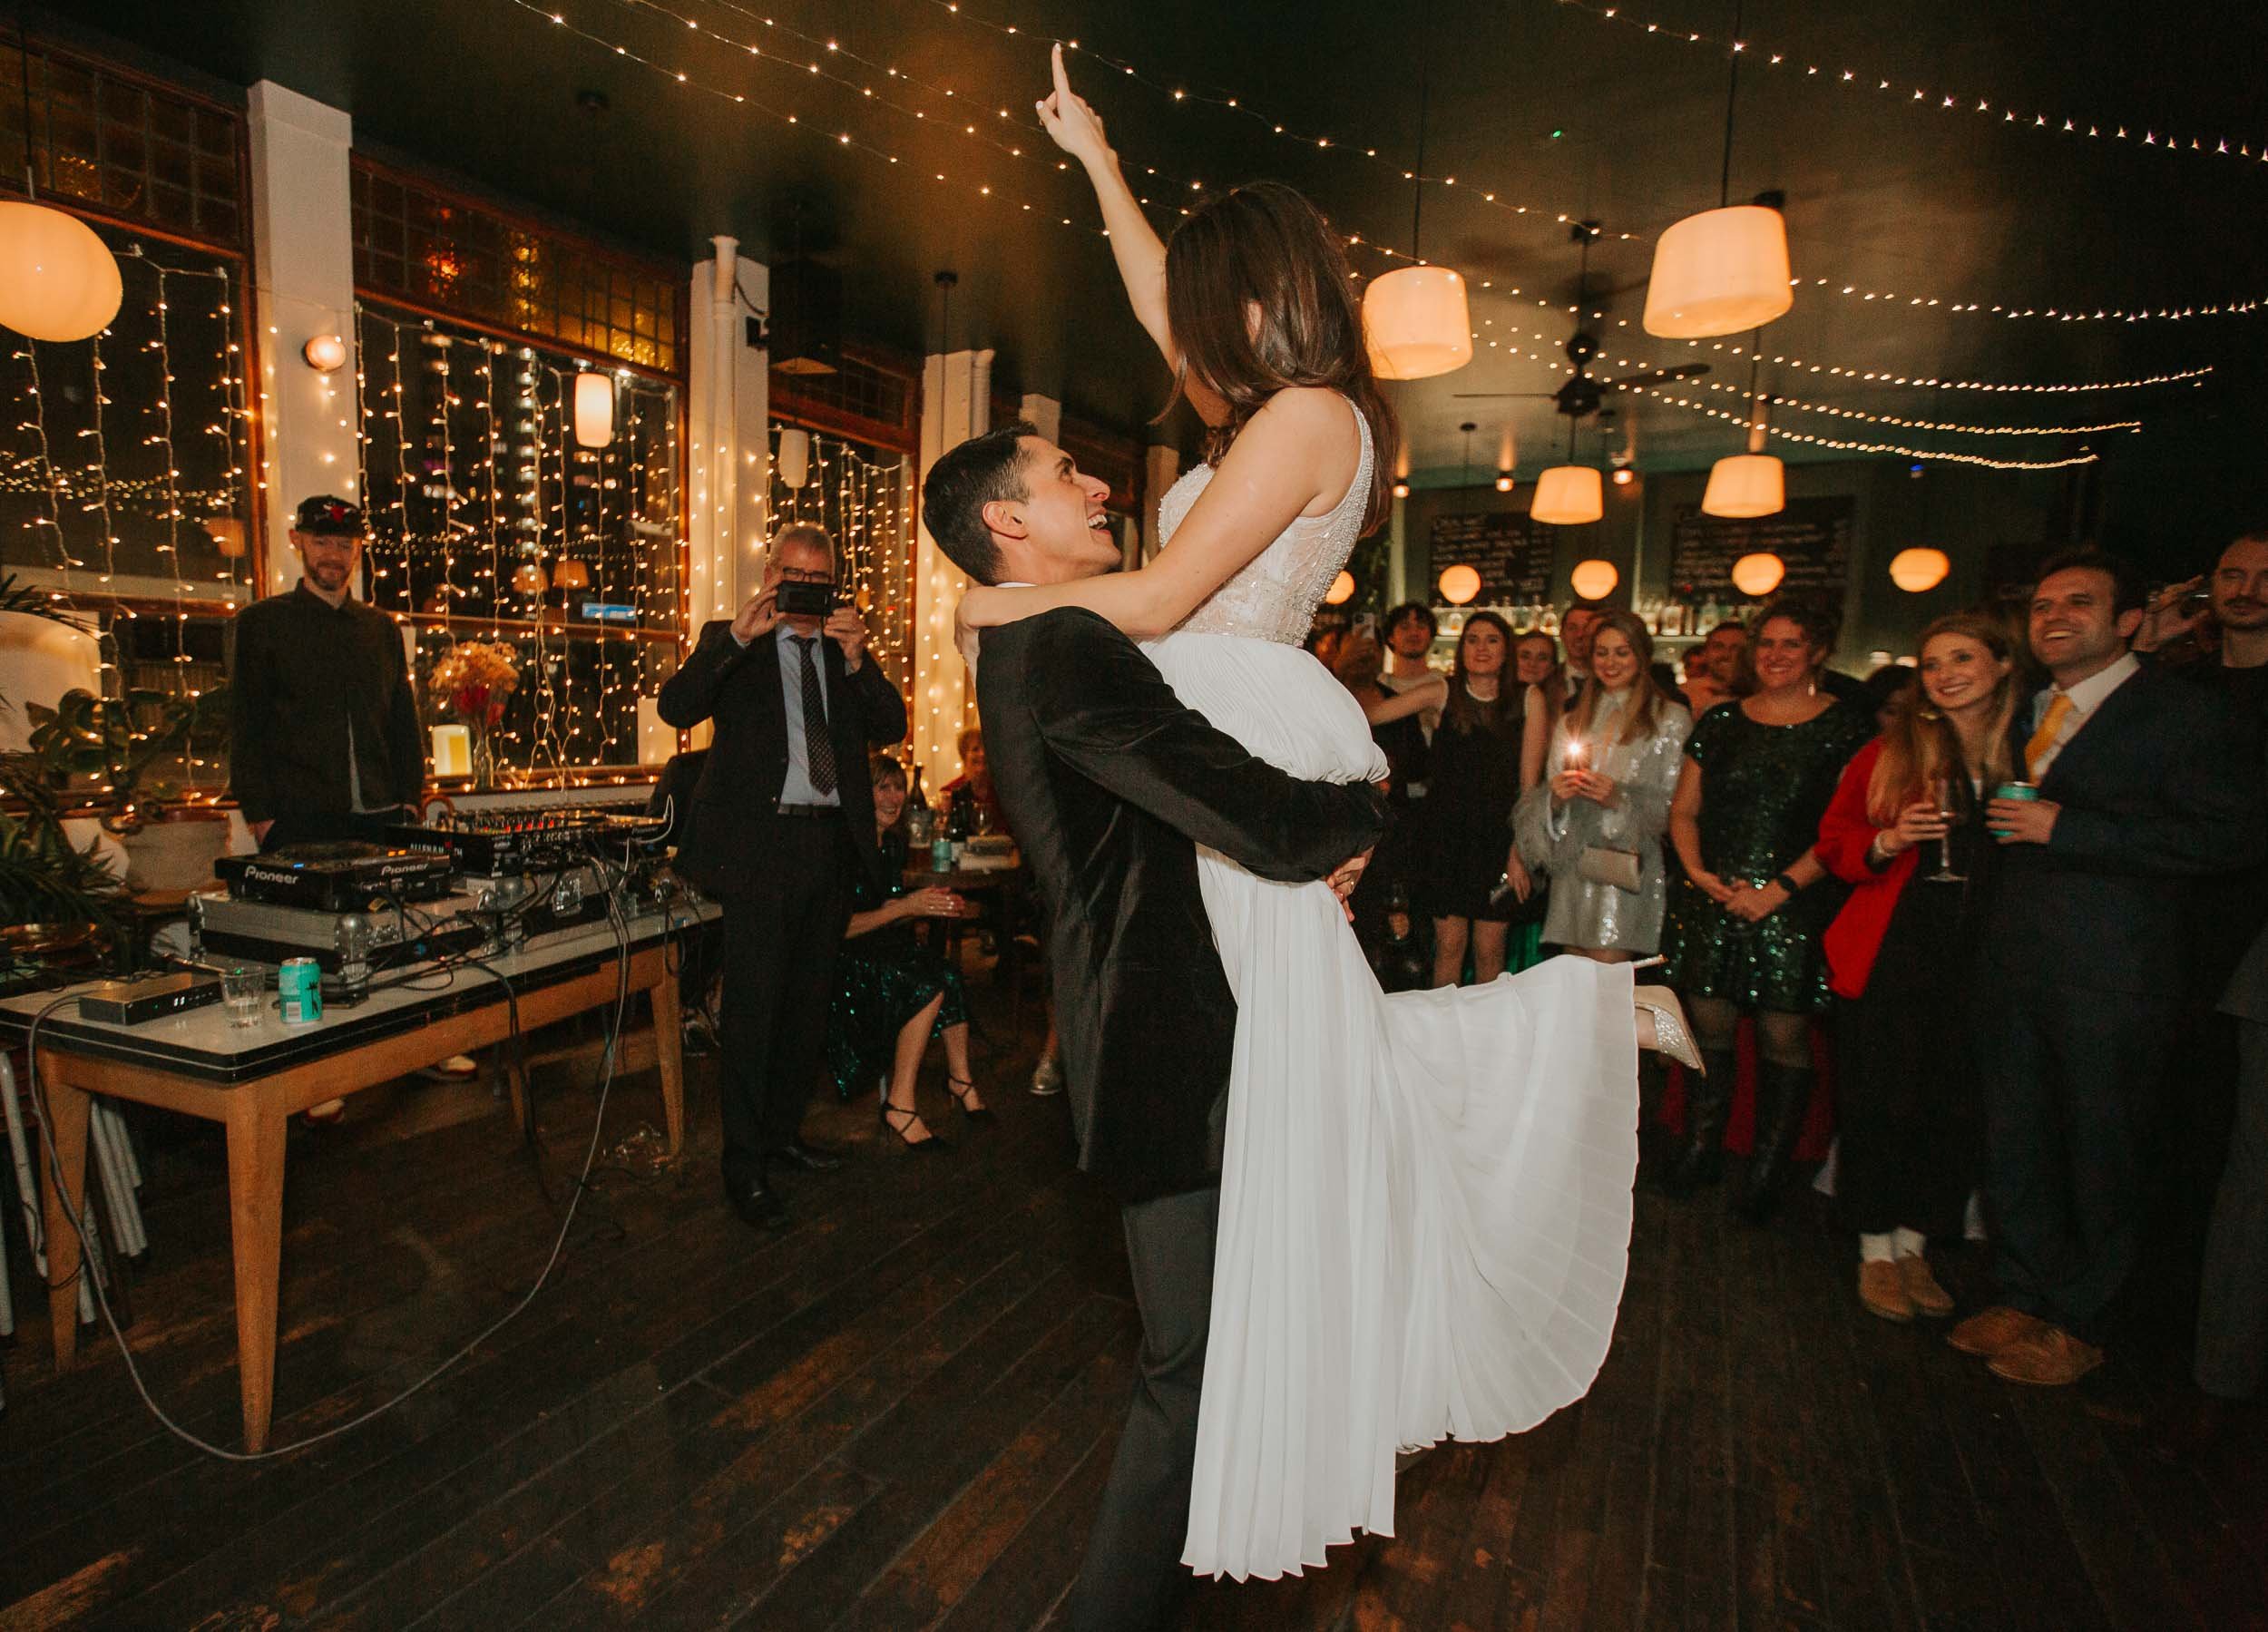  First dance of bride and groom at wedding venue Coin Laundry, Exmouth Market. 